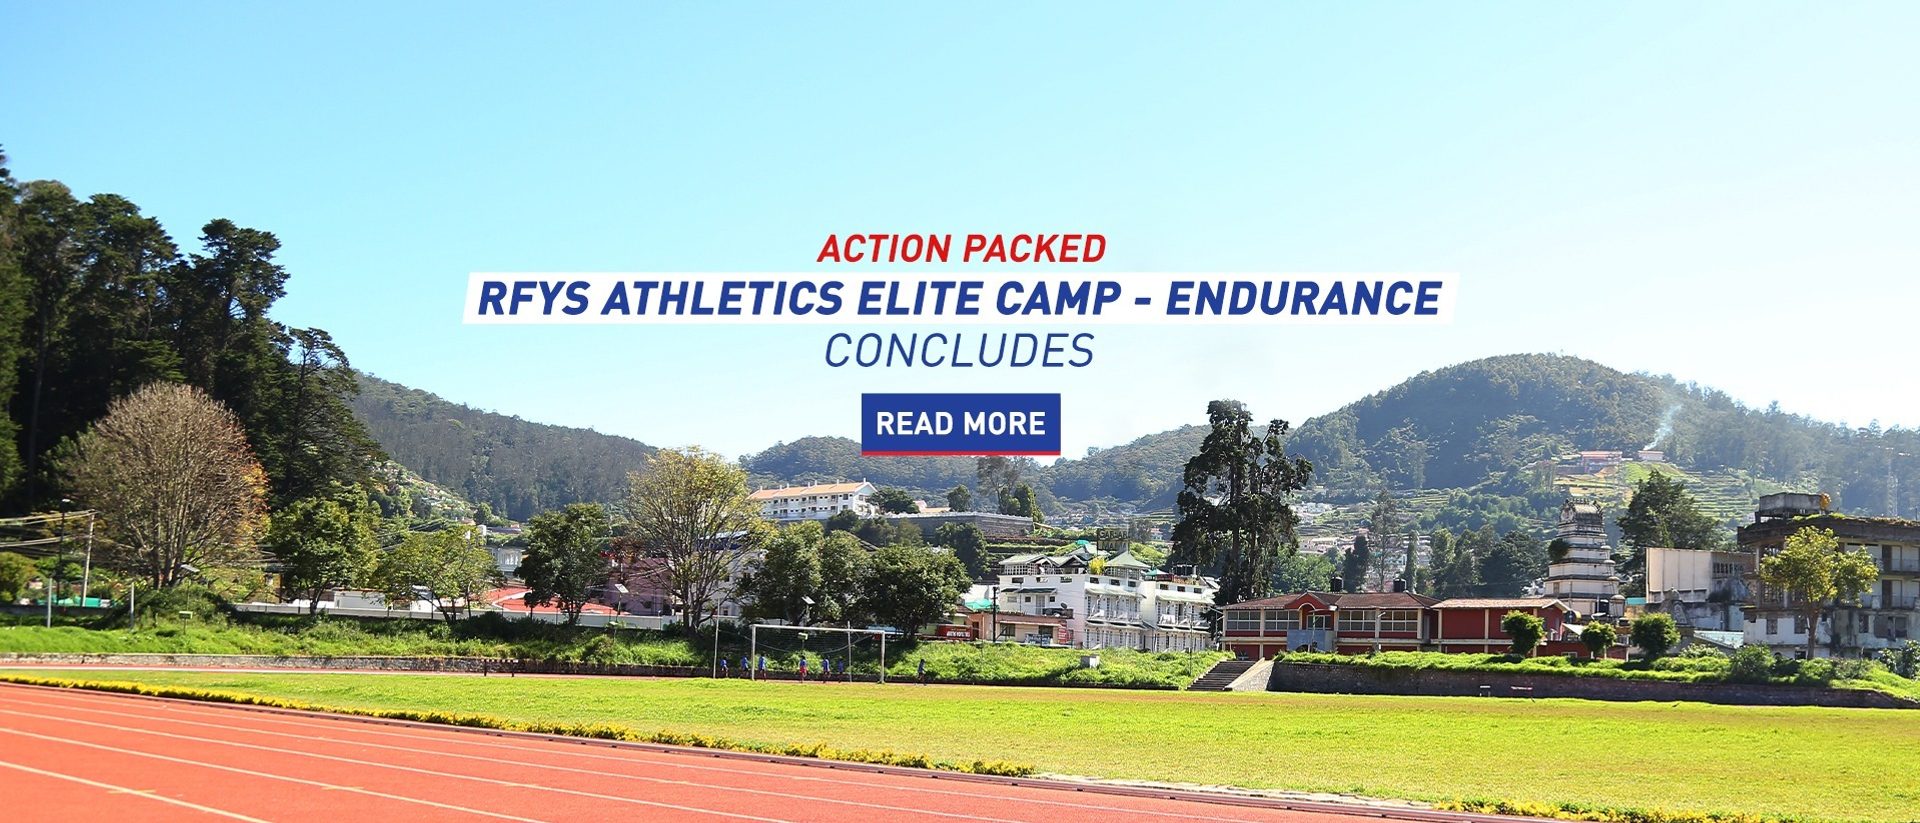 All You Need to Know About the Athletics Elite Camp - Endurance, Ooty